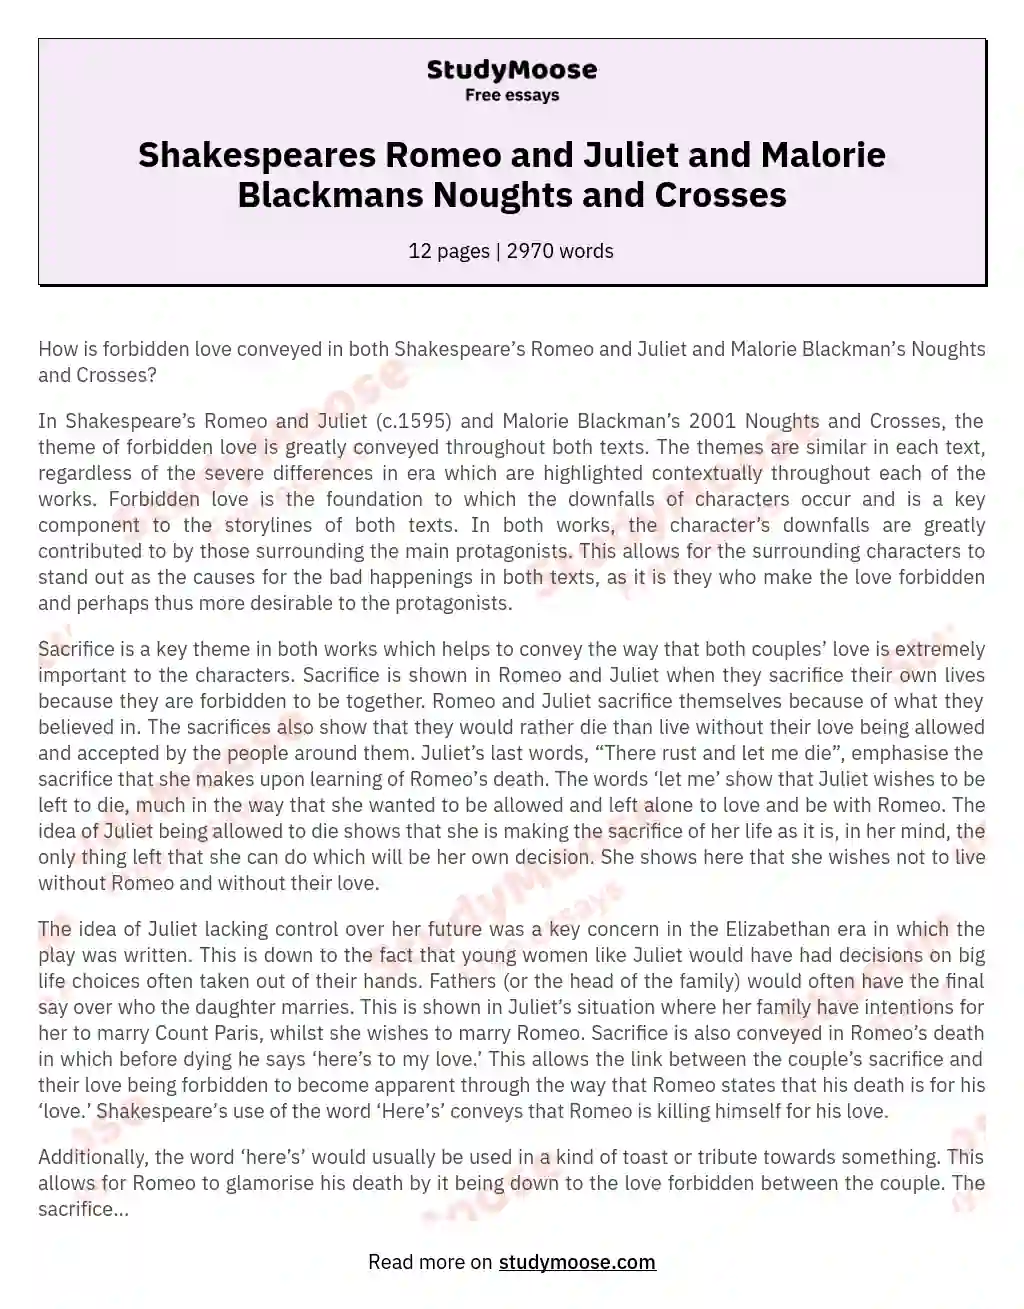 Shakespeares Romeo and Juliet and Malorie Blackmans Noughts and Crosses essay